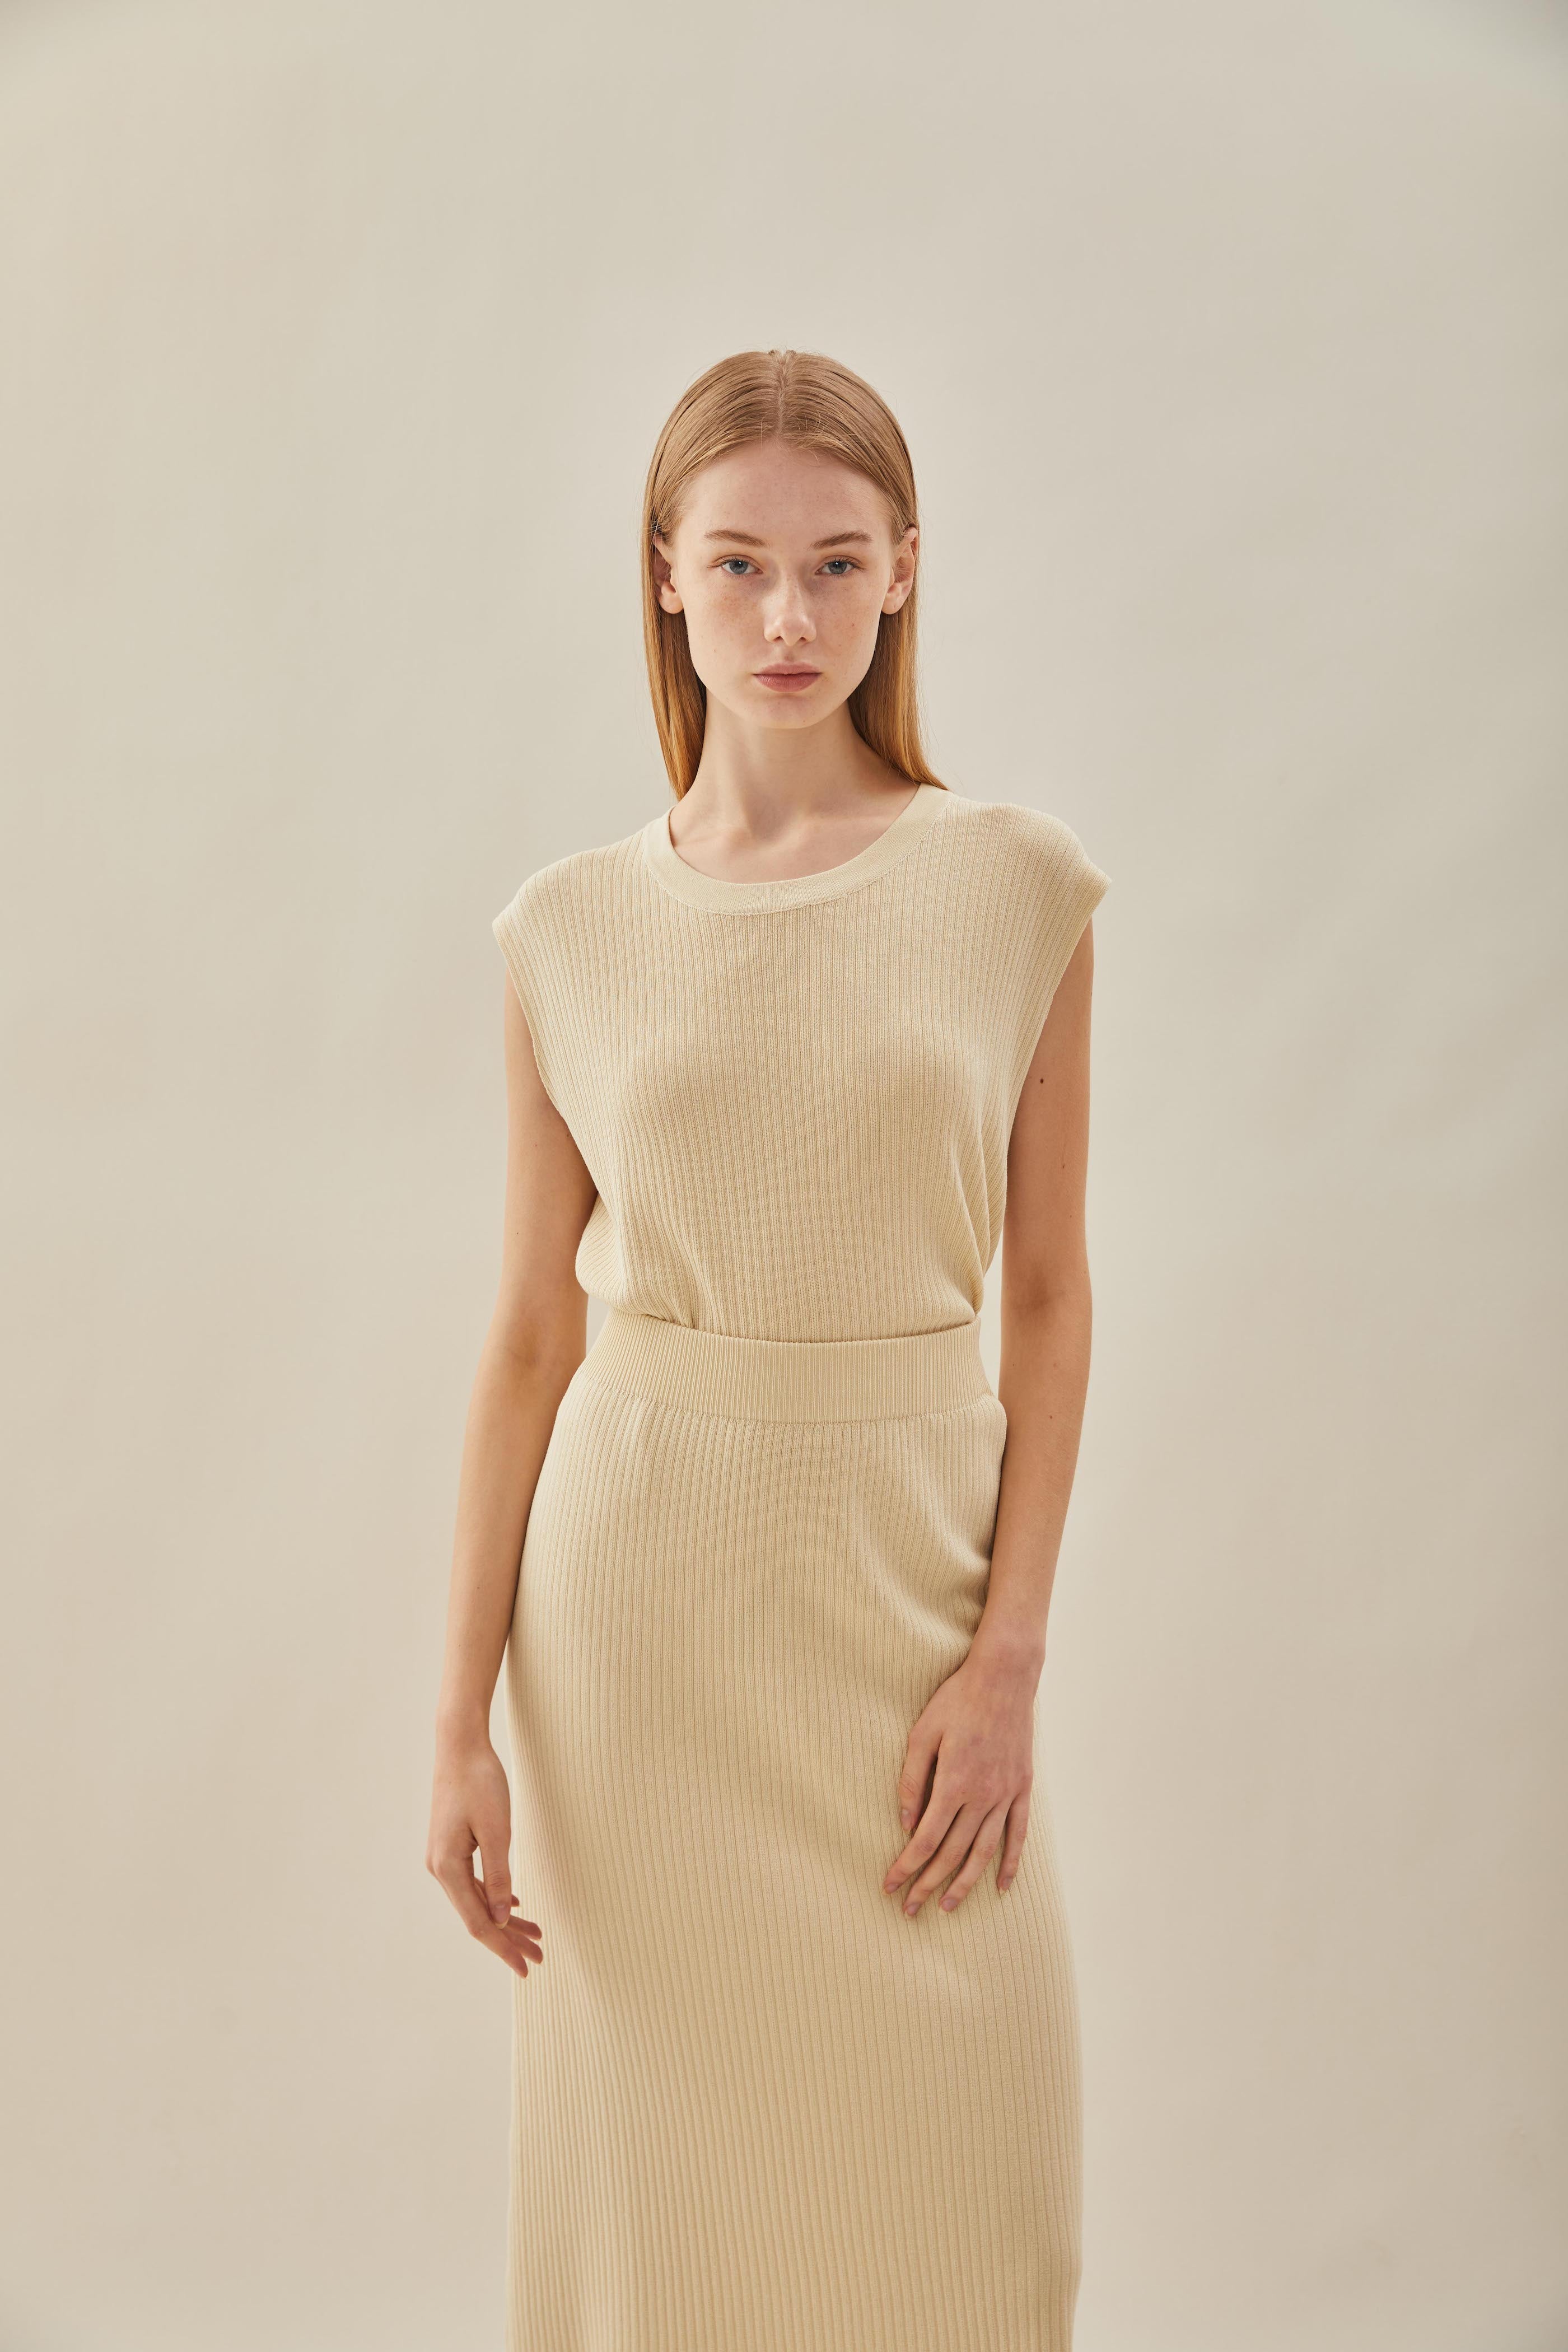 Knitted Round Neck Sleeveless Top in Natural